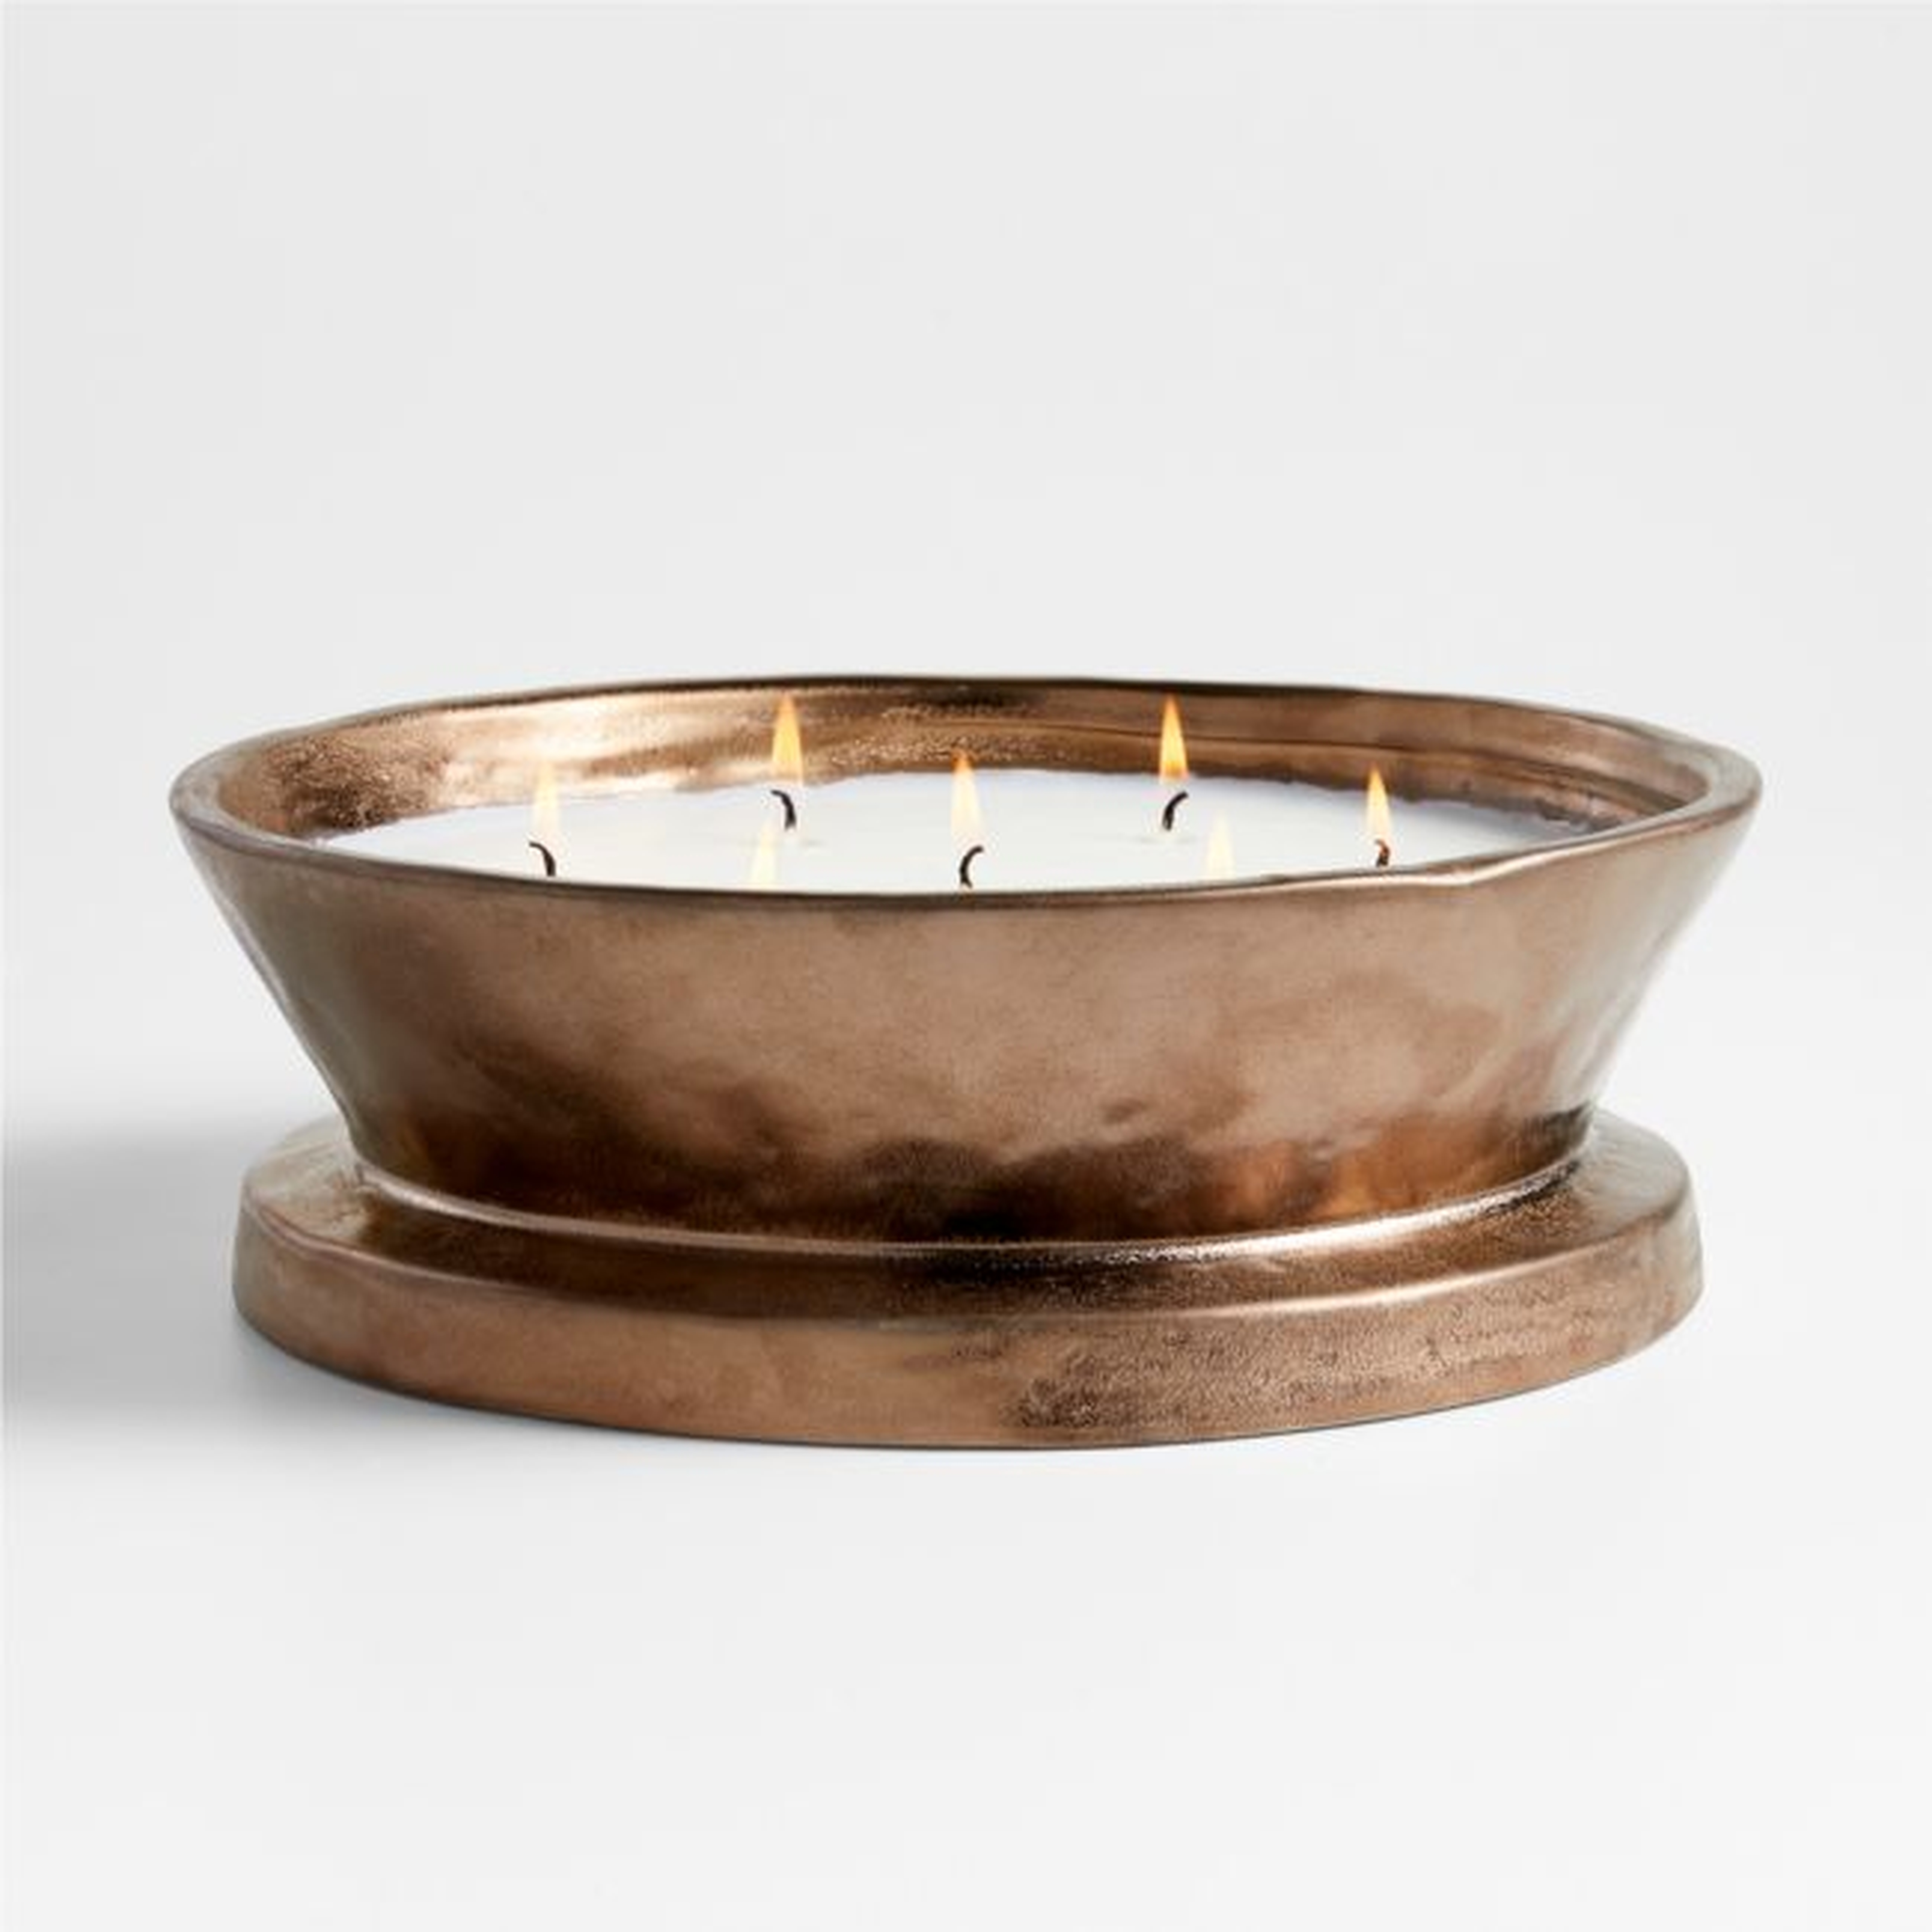 Ali Smoked Cedar Scented Ceramic Candle by Leanne Ford - Crate and Barrel